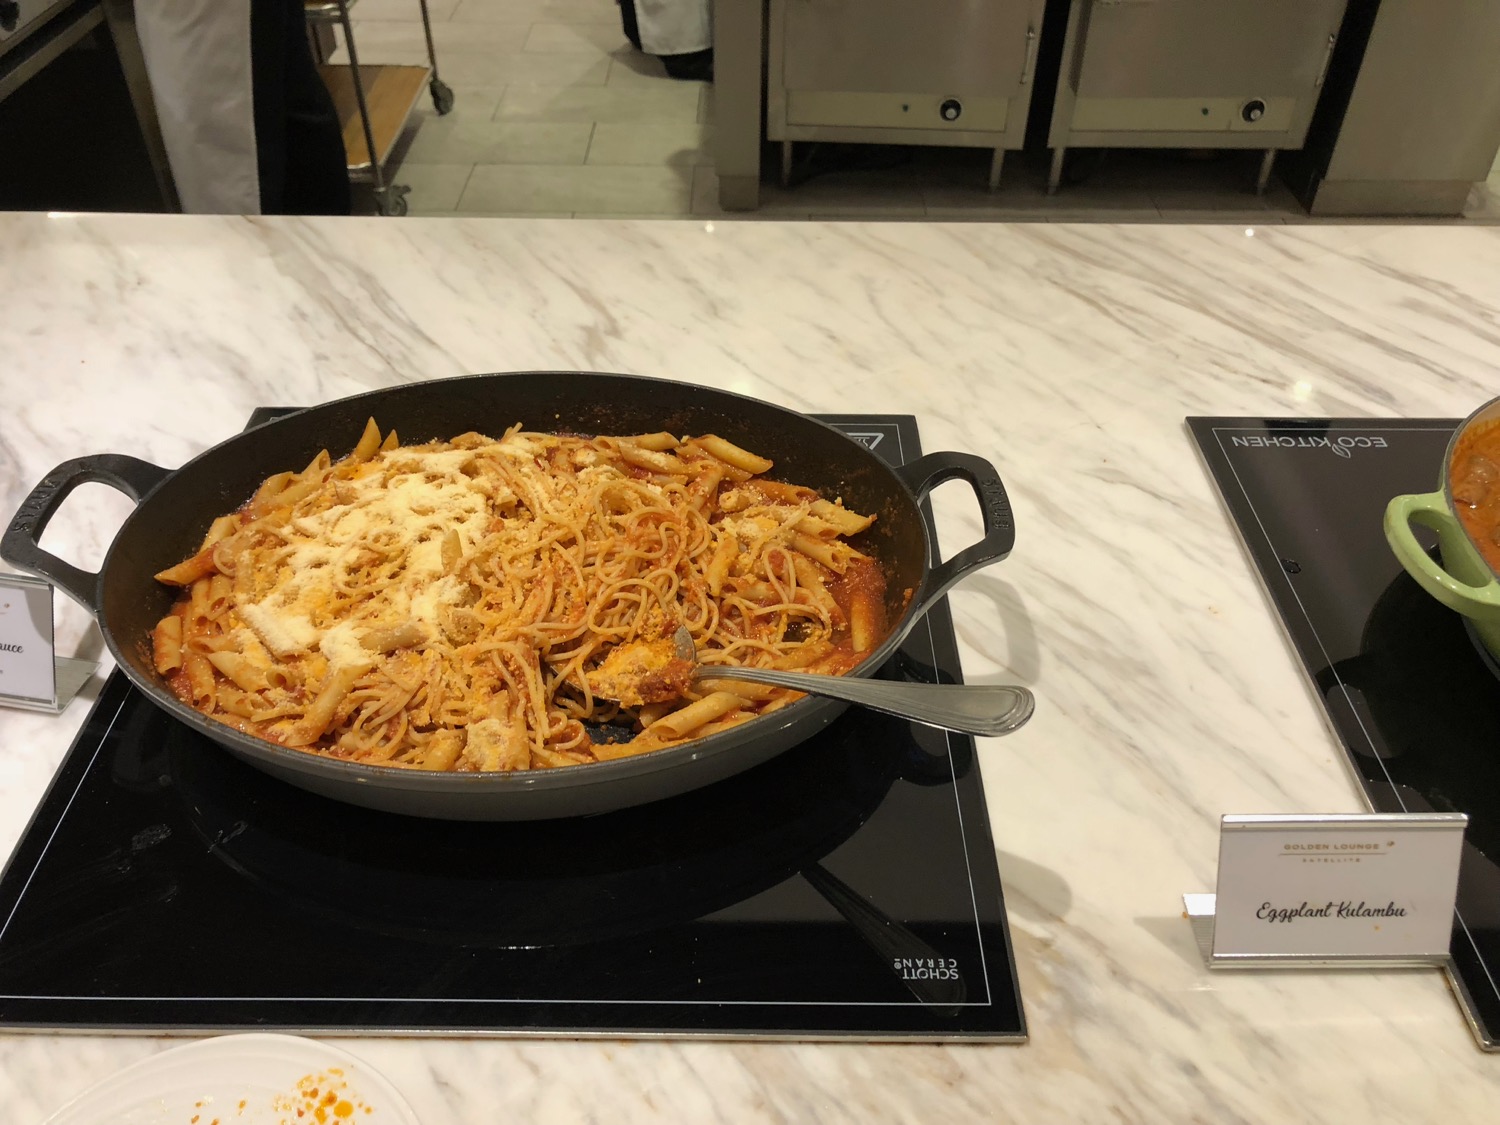 a pan of pasta with cheese and sauce on a stove top